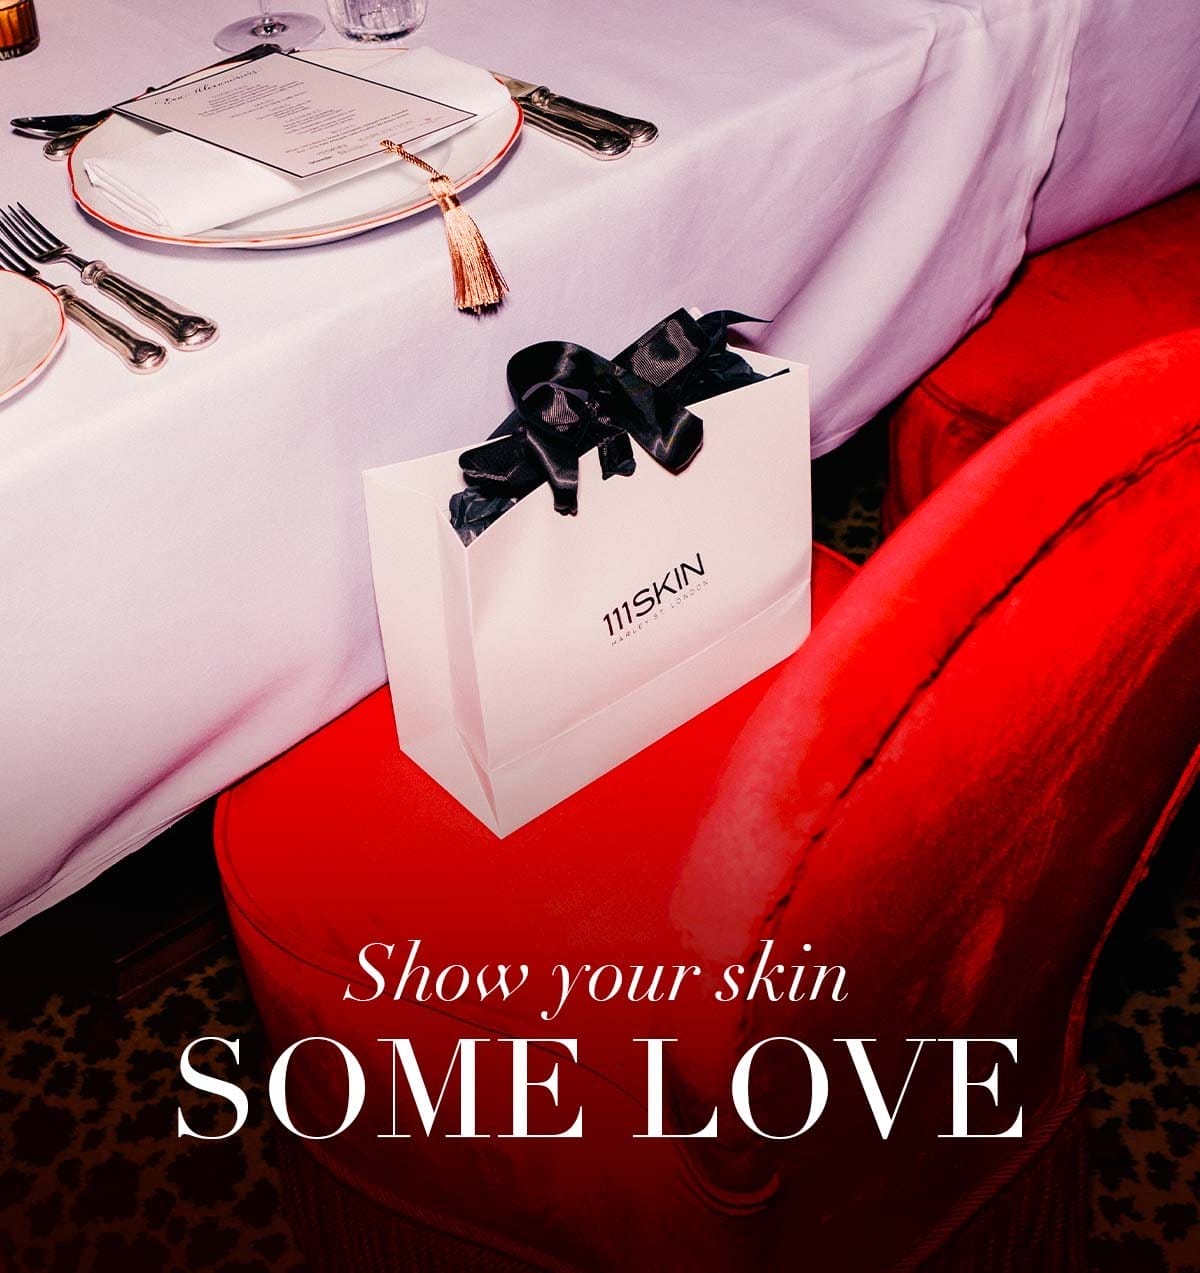 Show your skin some love this Valentine's Day